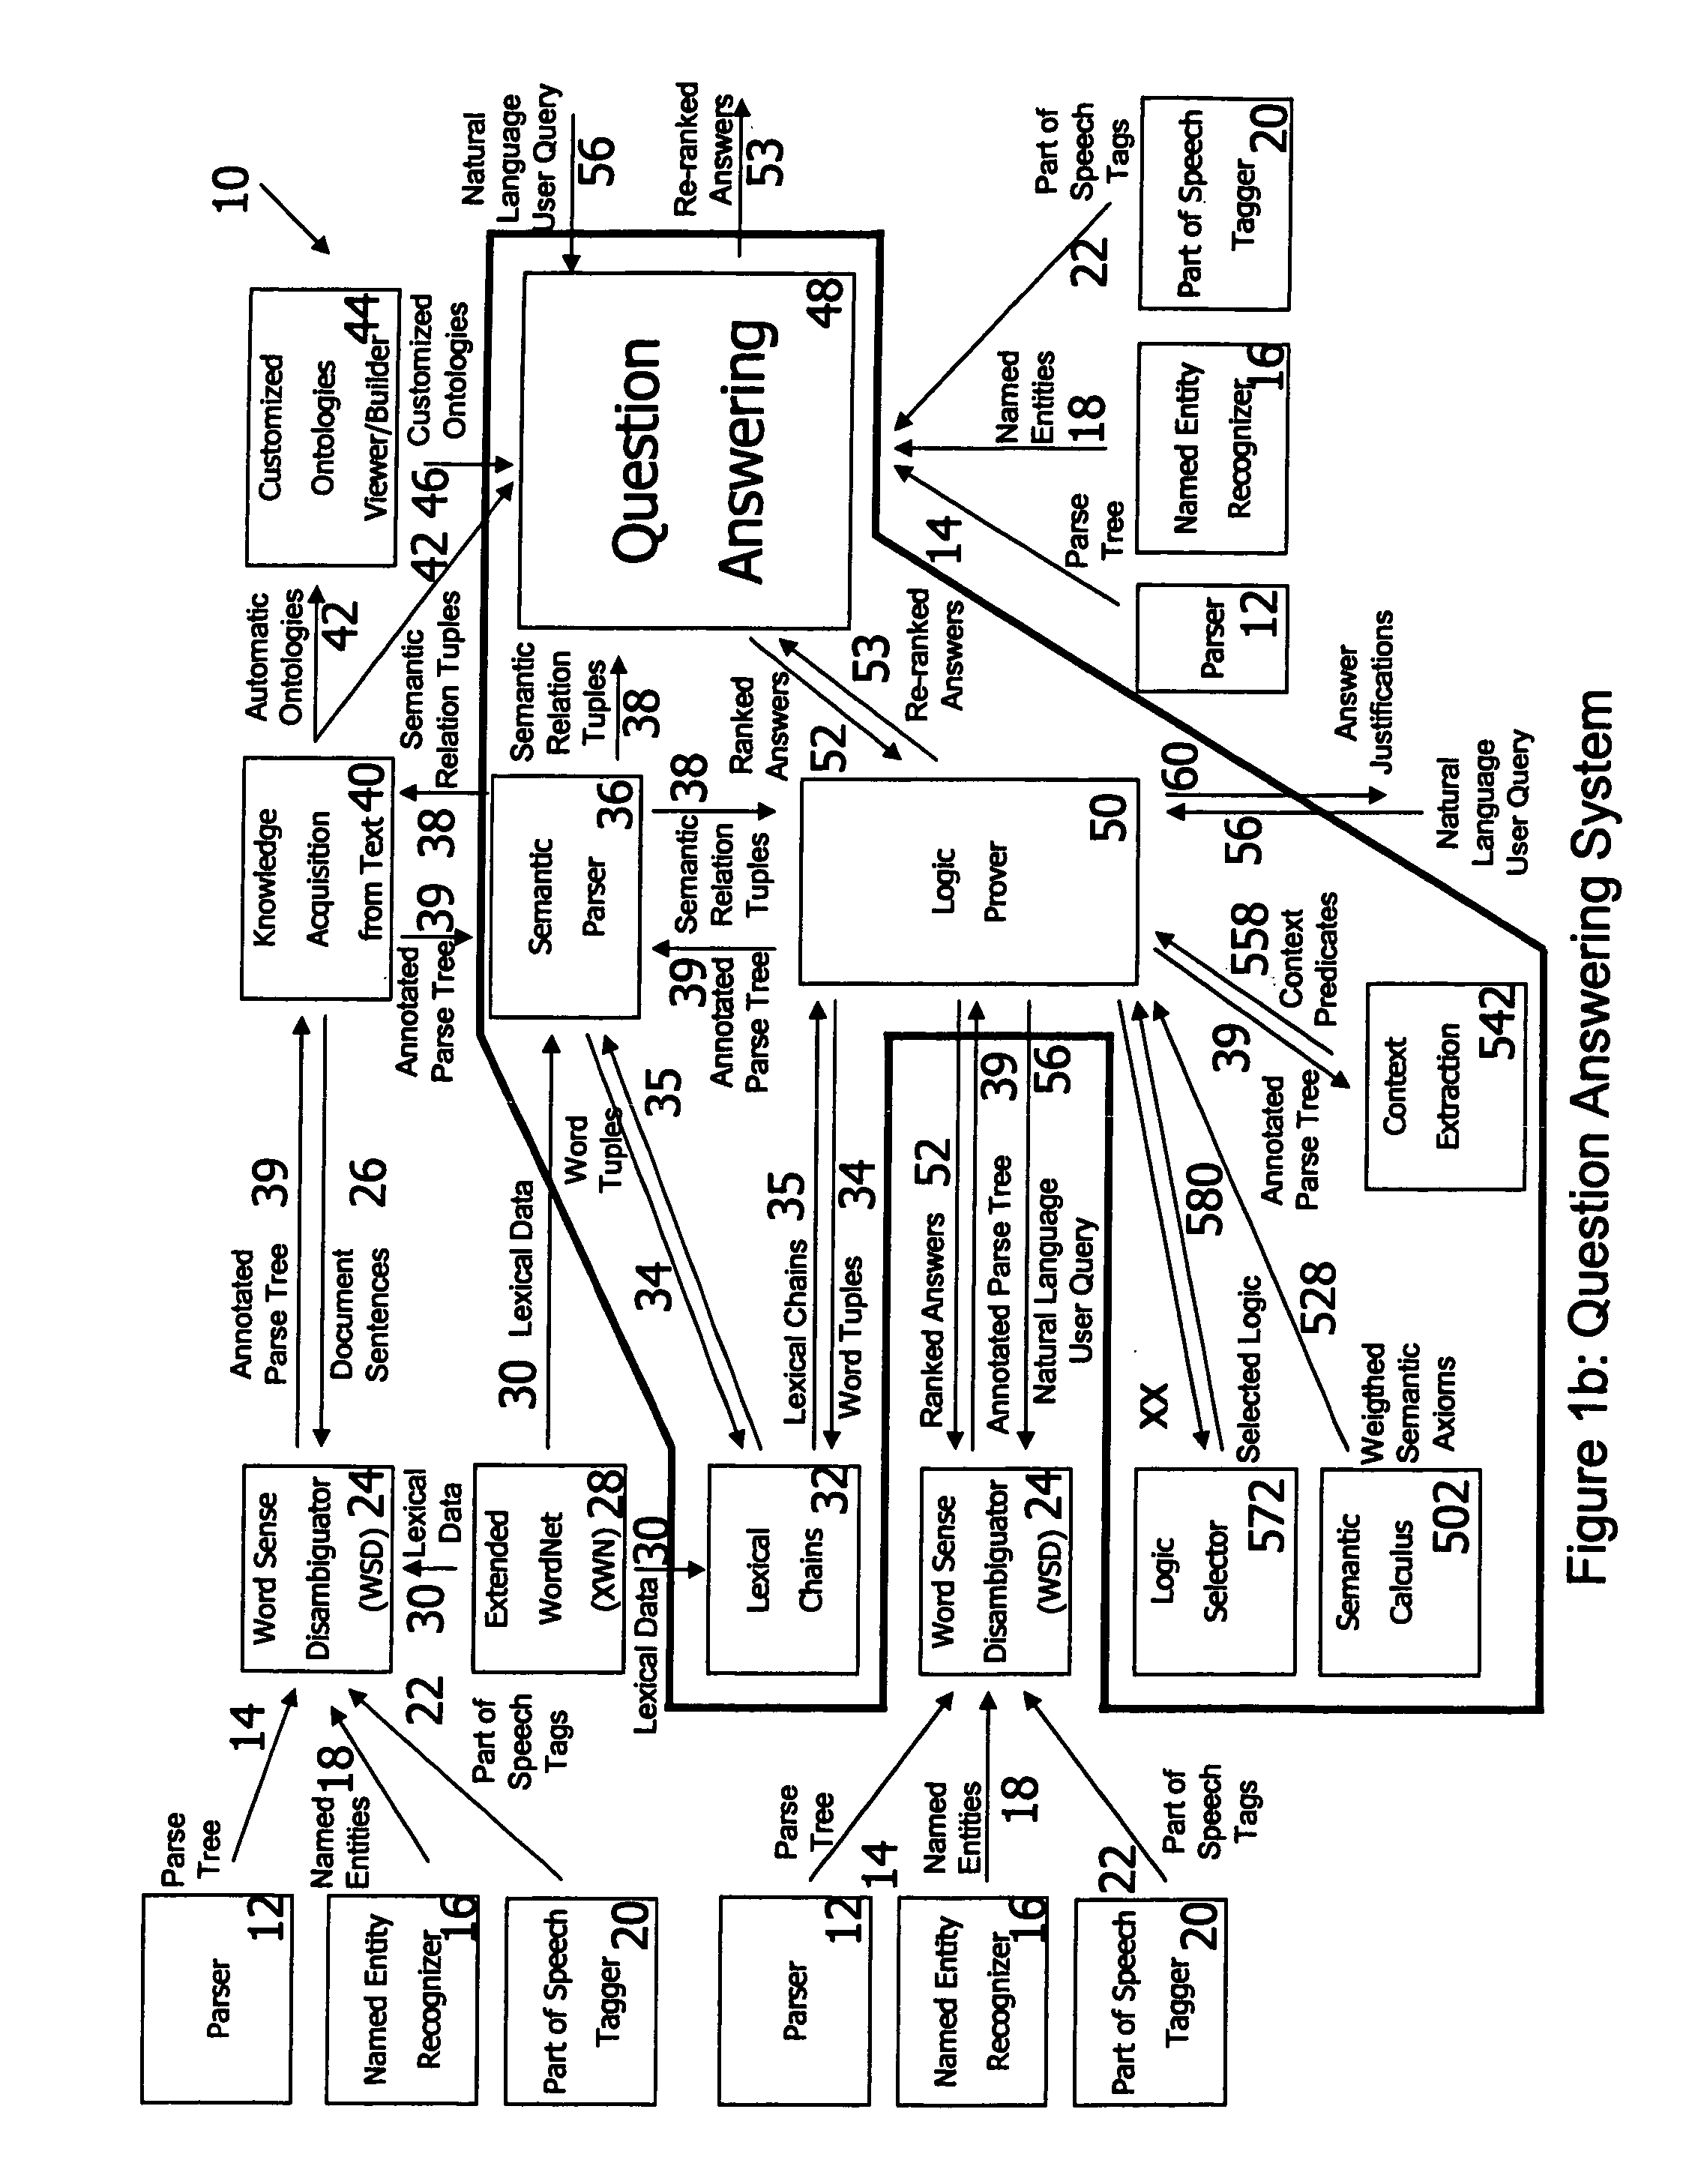 Natural language question answering system and method utilizing multi-modal logic